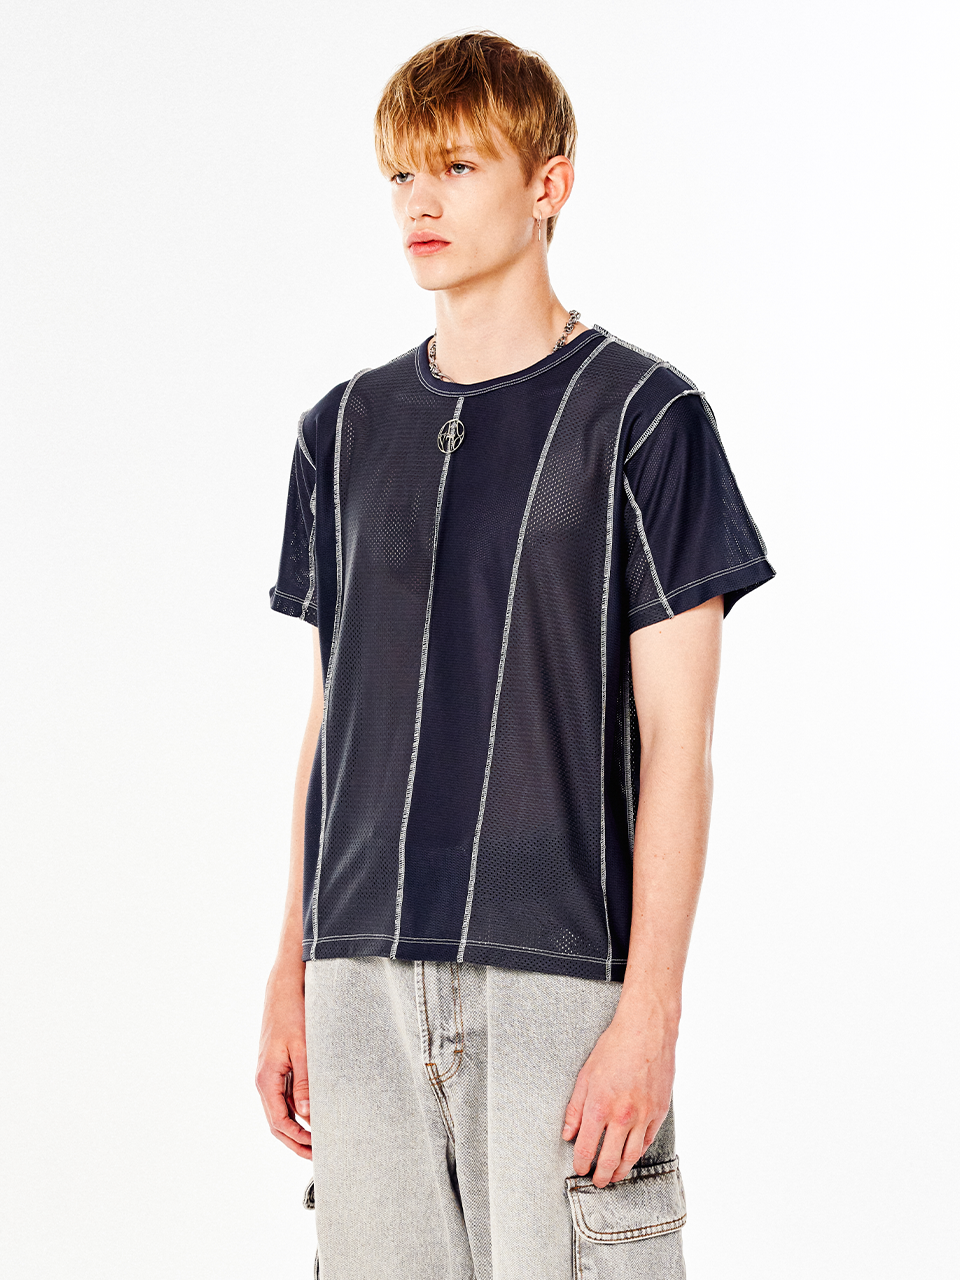 3 Mixed Patchwork T-Shirt_[Charcoal]